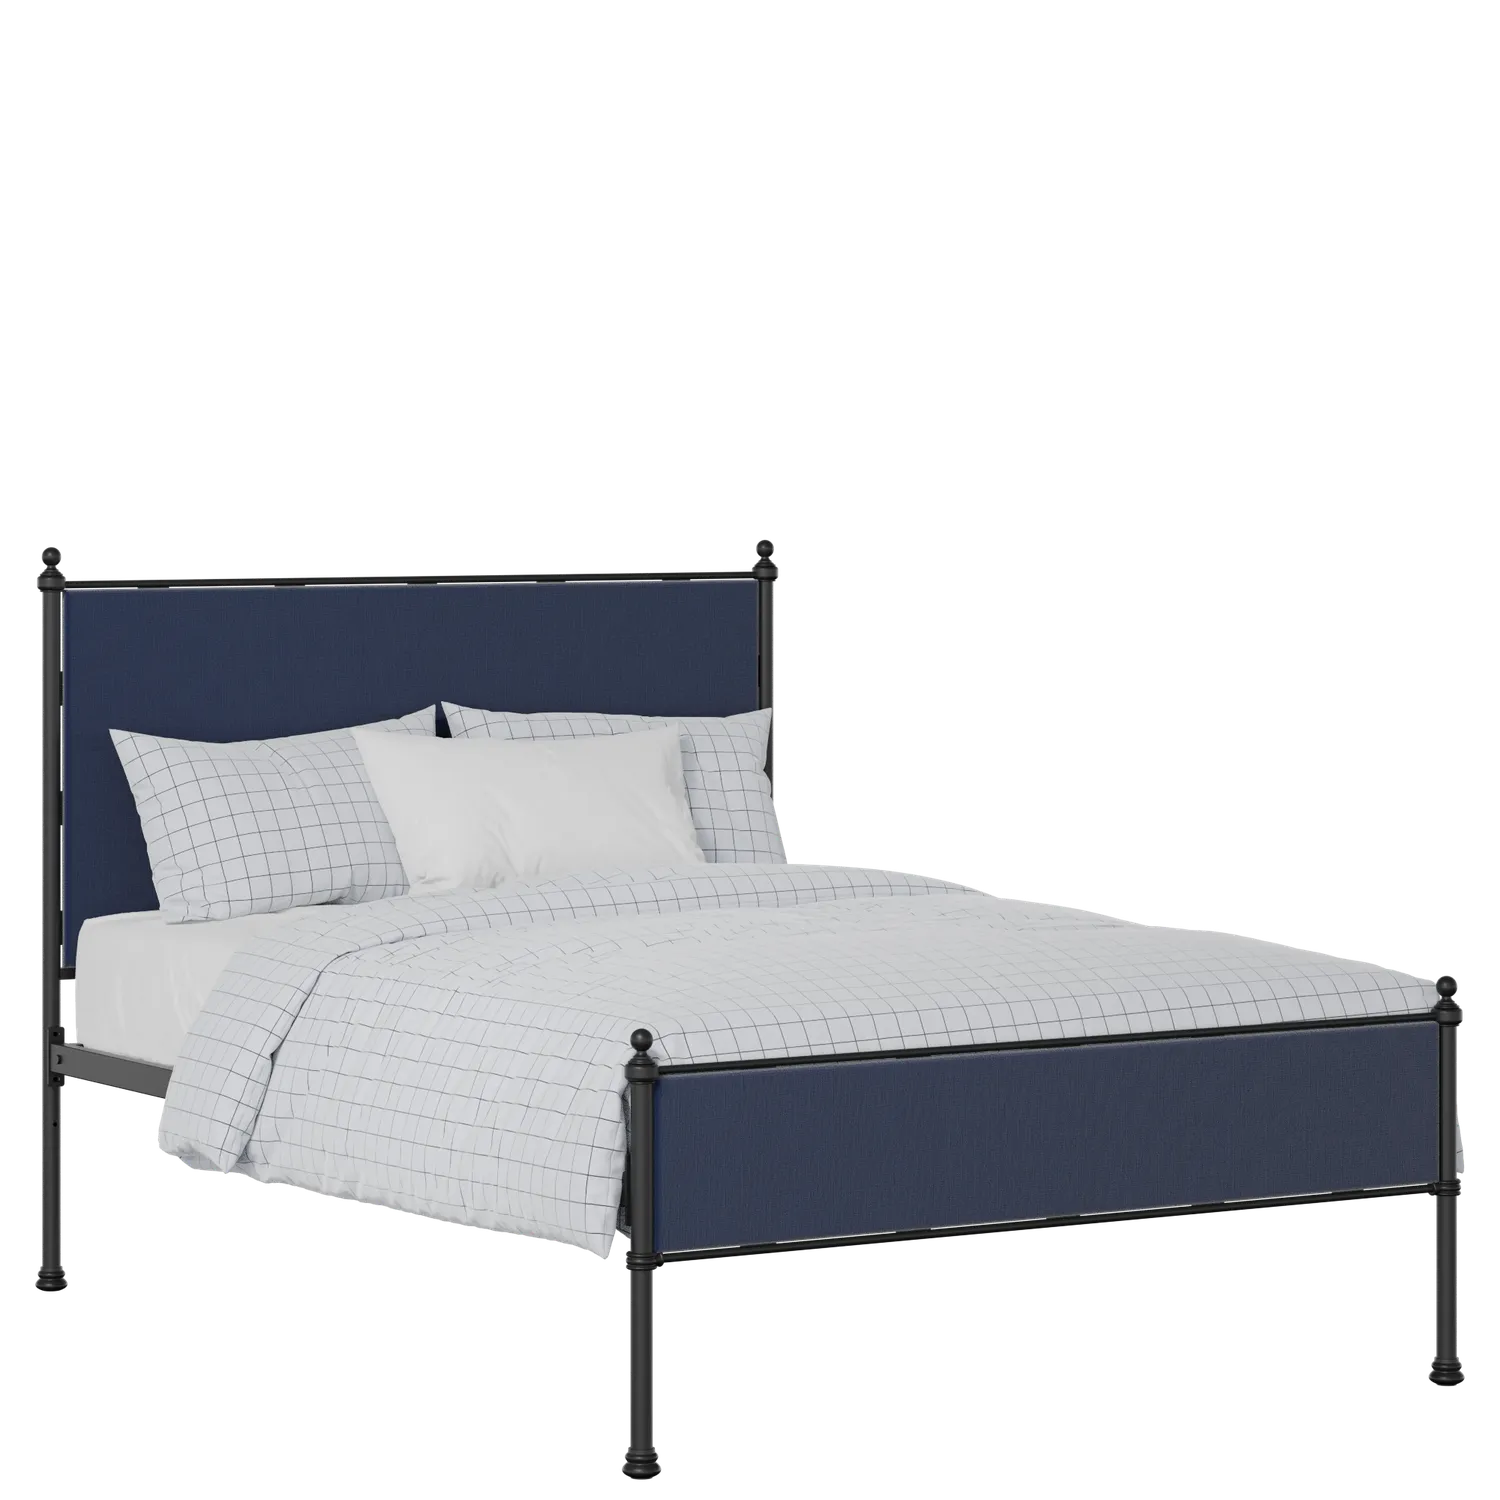 Neville Slim iron/metal upholstered bed in black with blue fabric